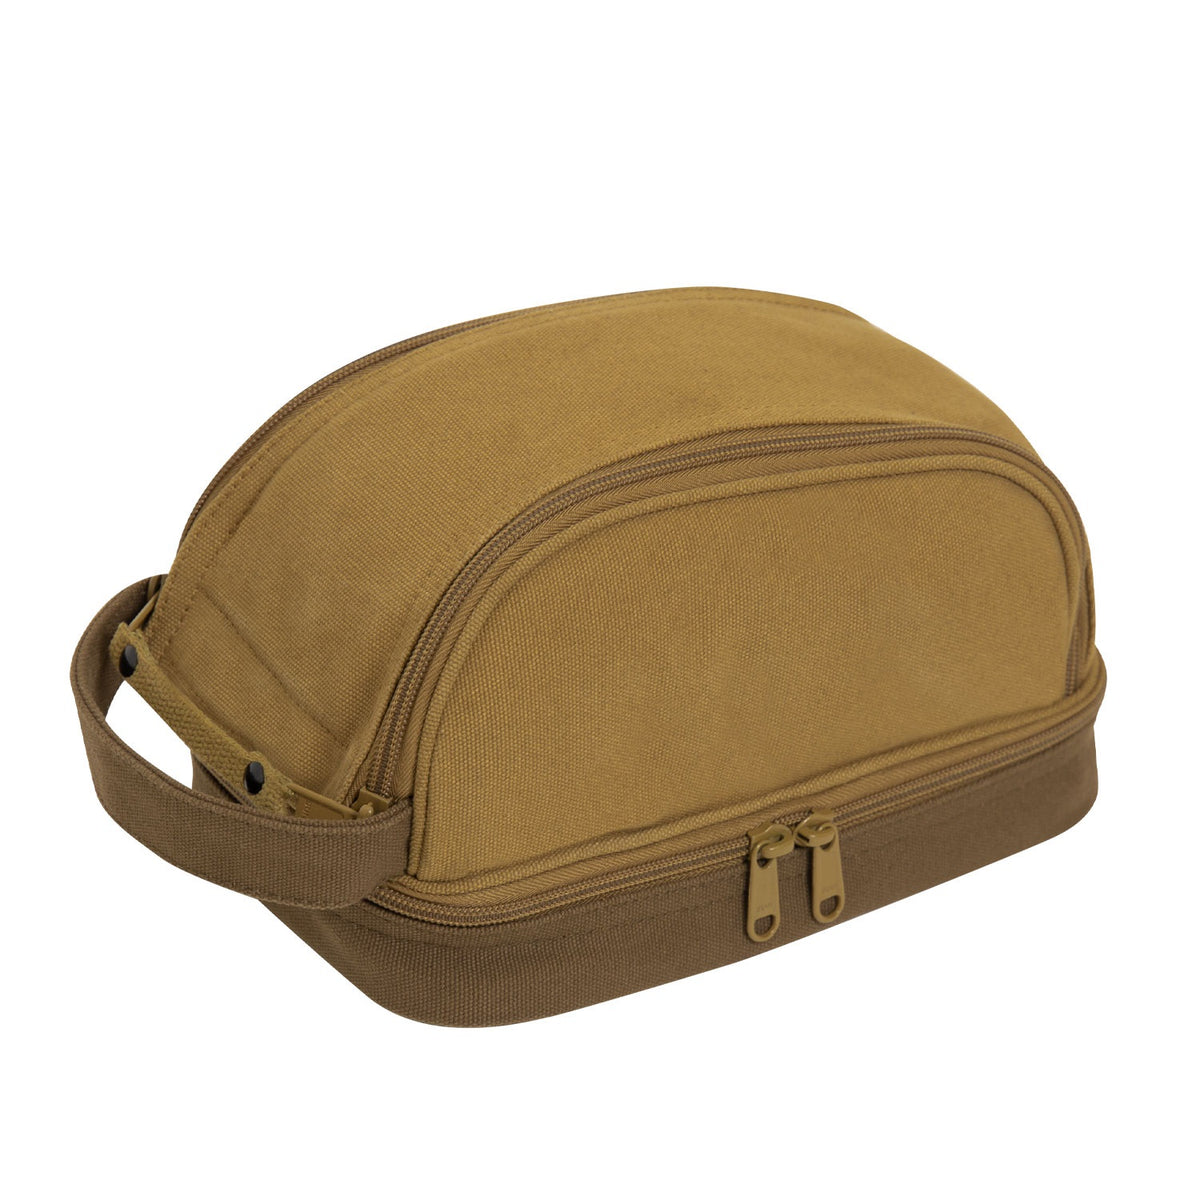 Rothco Deluxe Canvas Travel Kit Coyote Brown